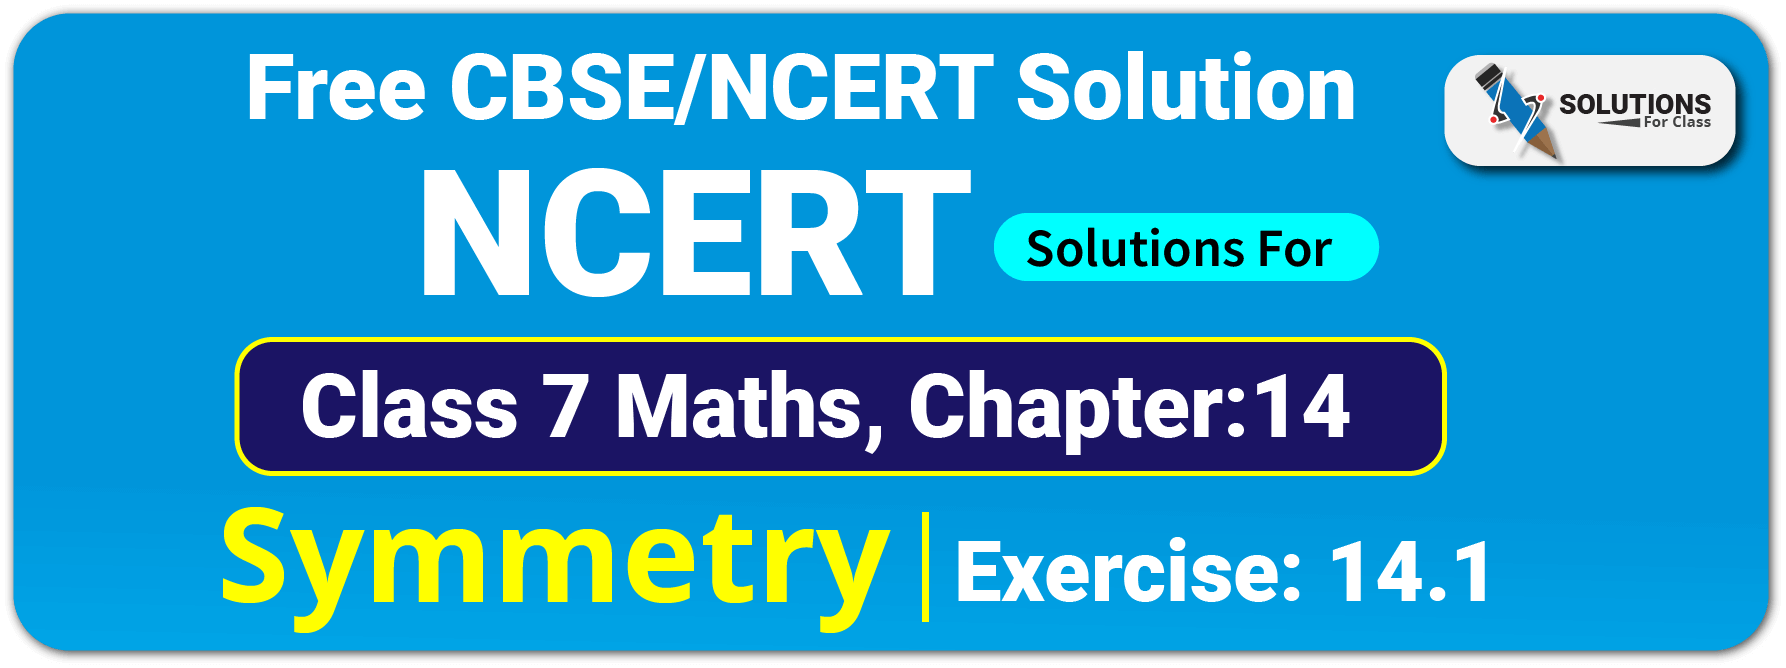 NCERT Solutions For Class 7 Maths Chapter 14 Symmetry Exercise 14.1